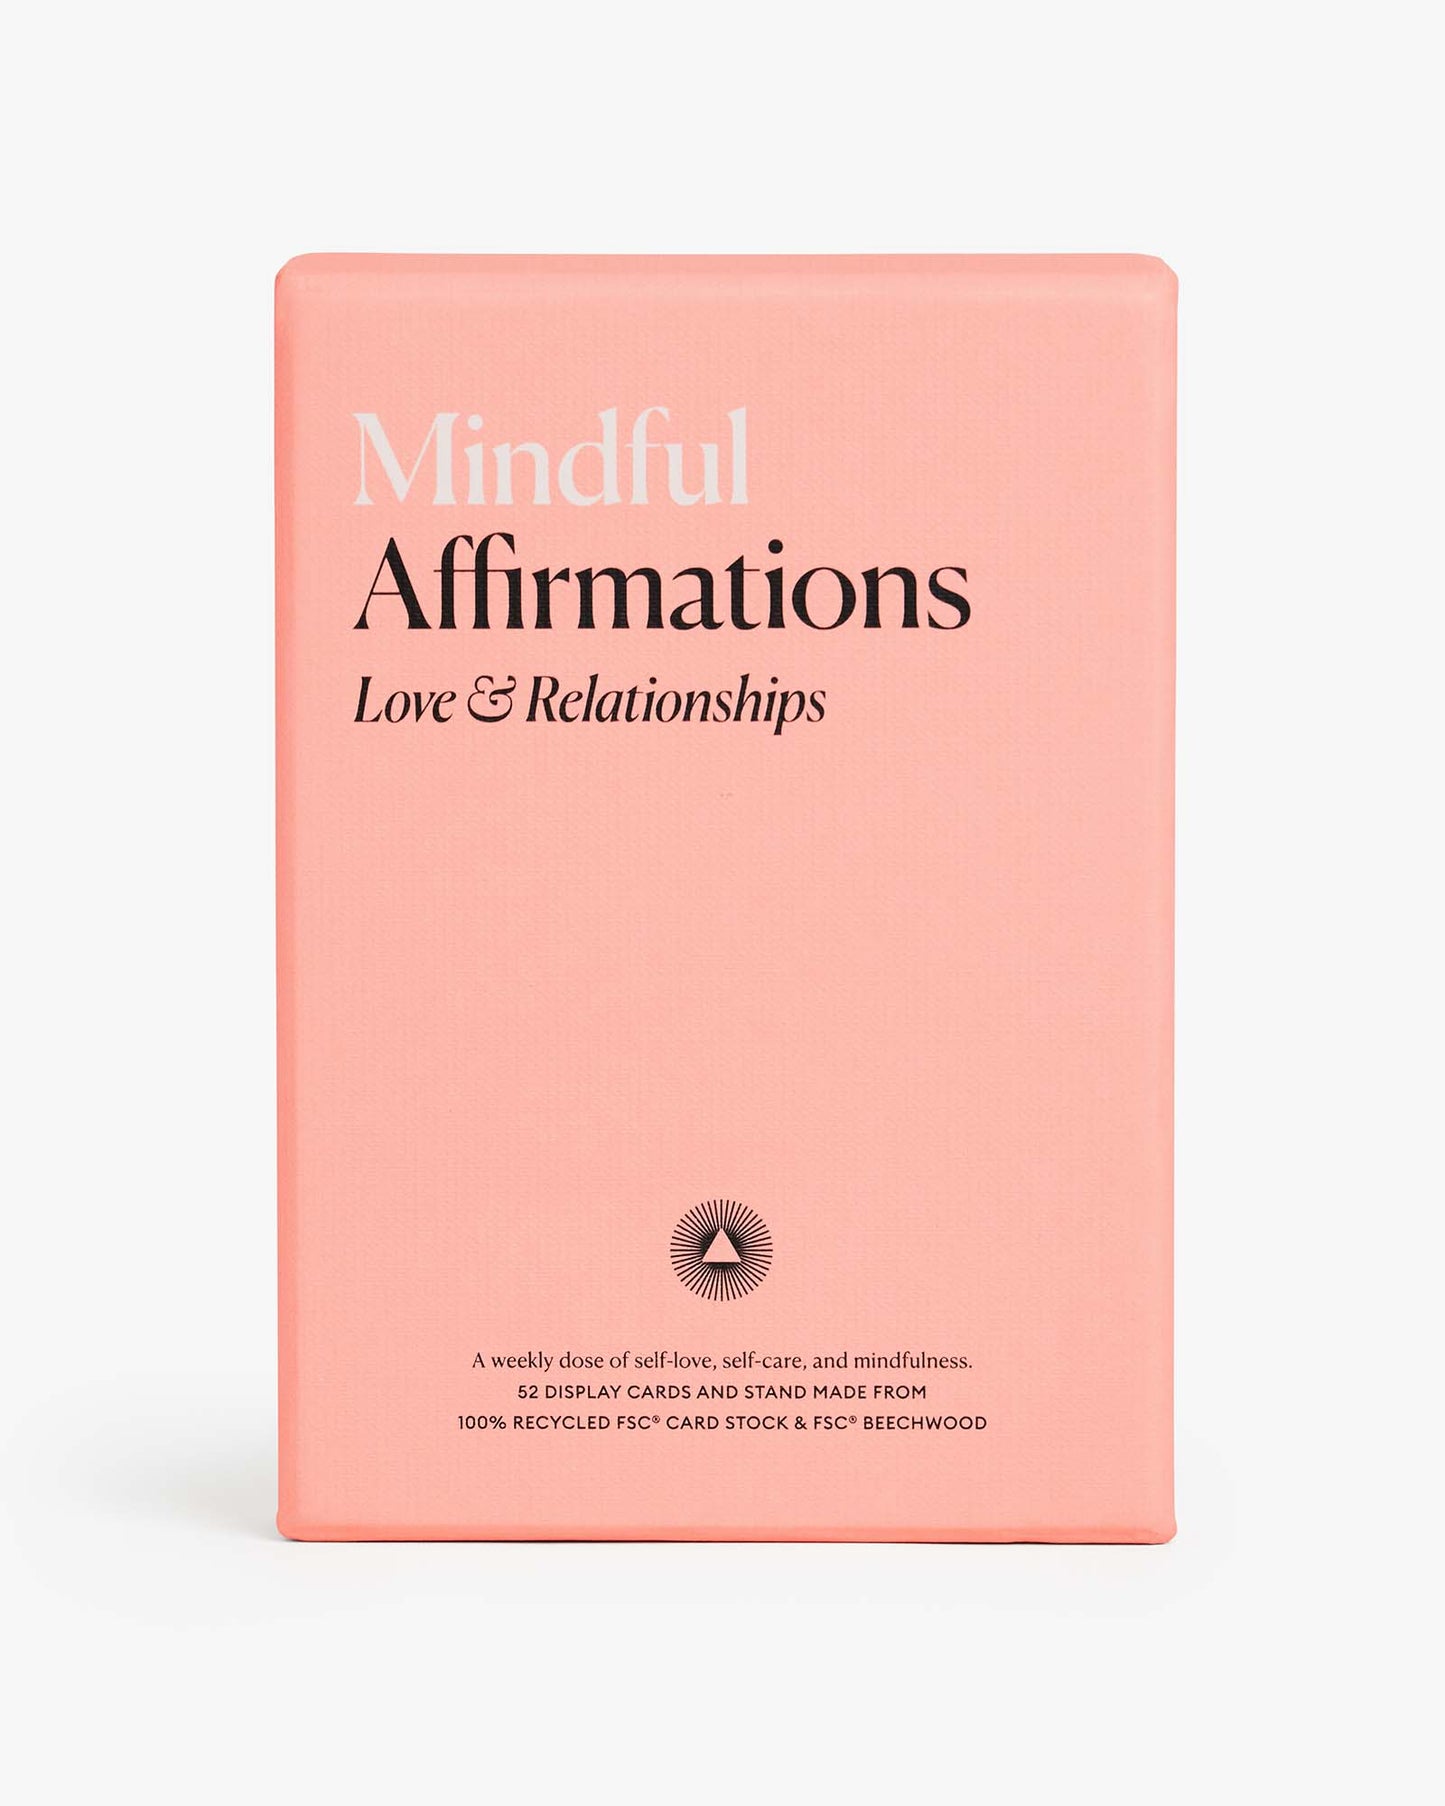 Mindful Affirmations for Love & Relationships by Intelligent Change